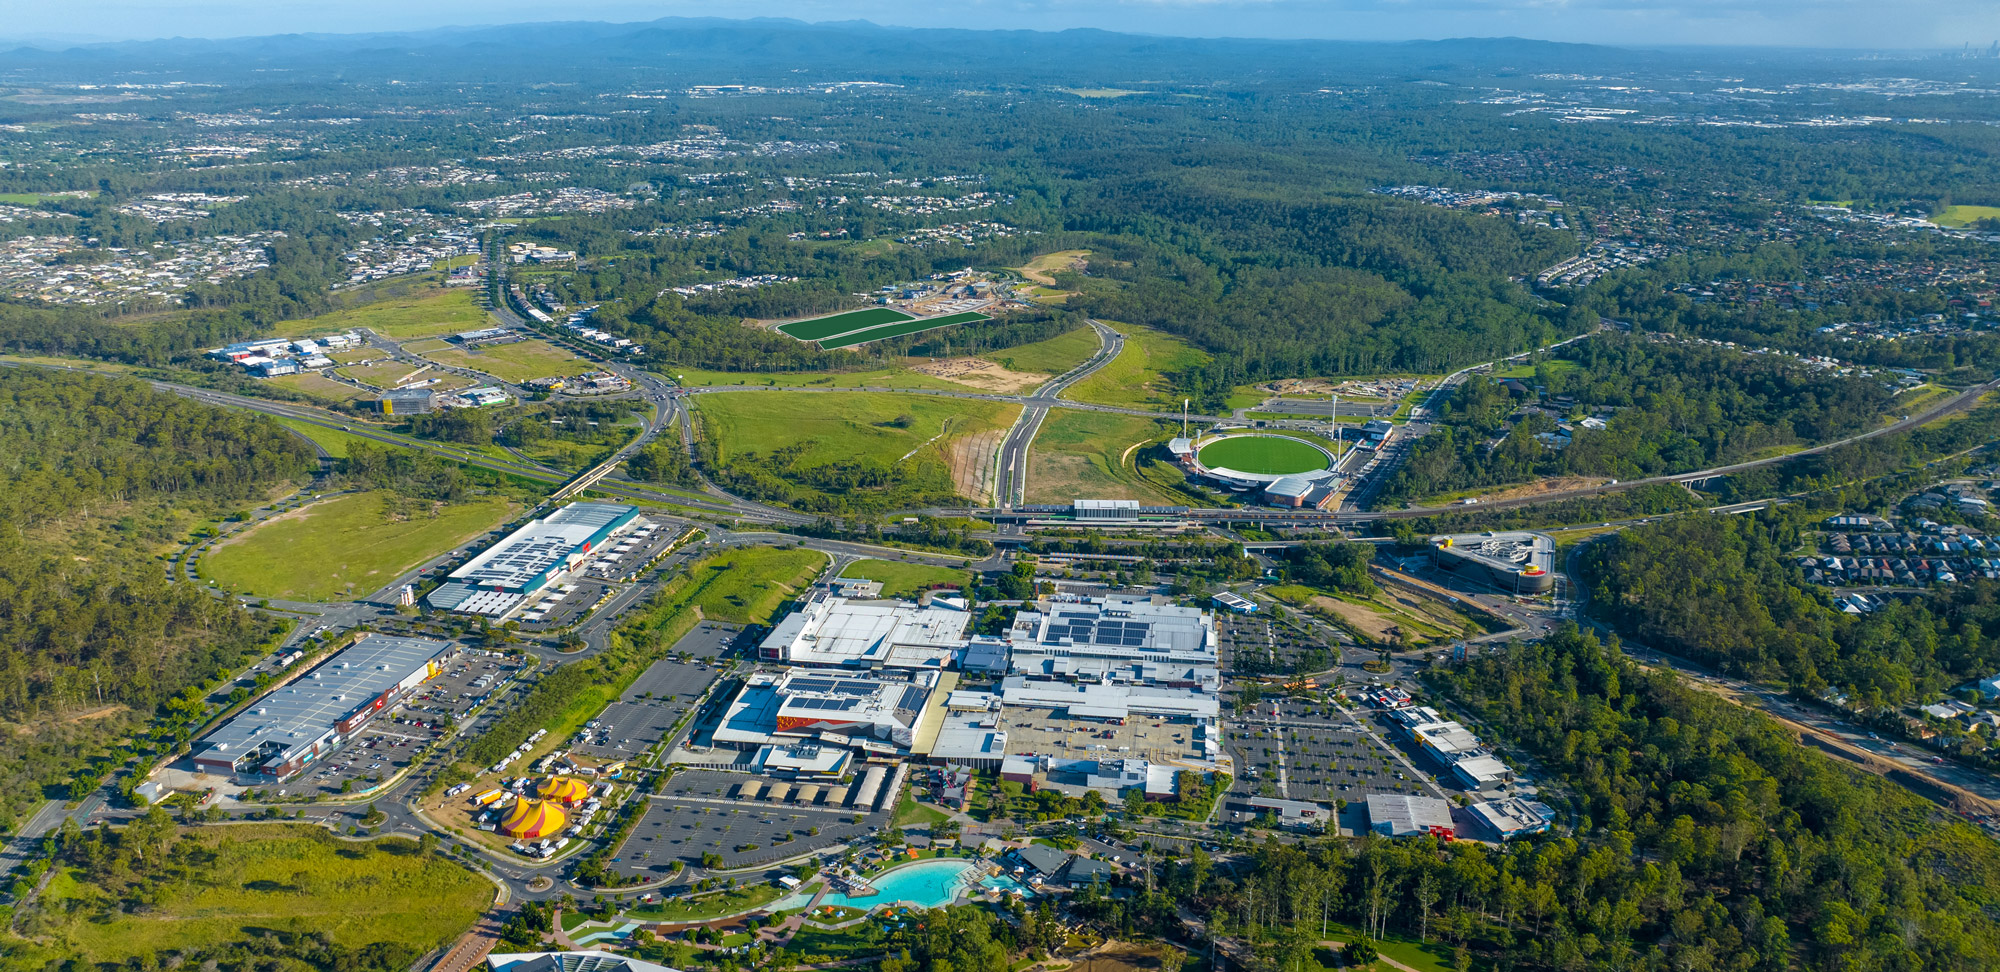 image of greater springfield and brookwater residential community in brisbane australia